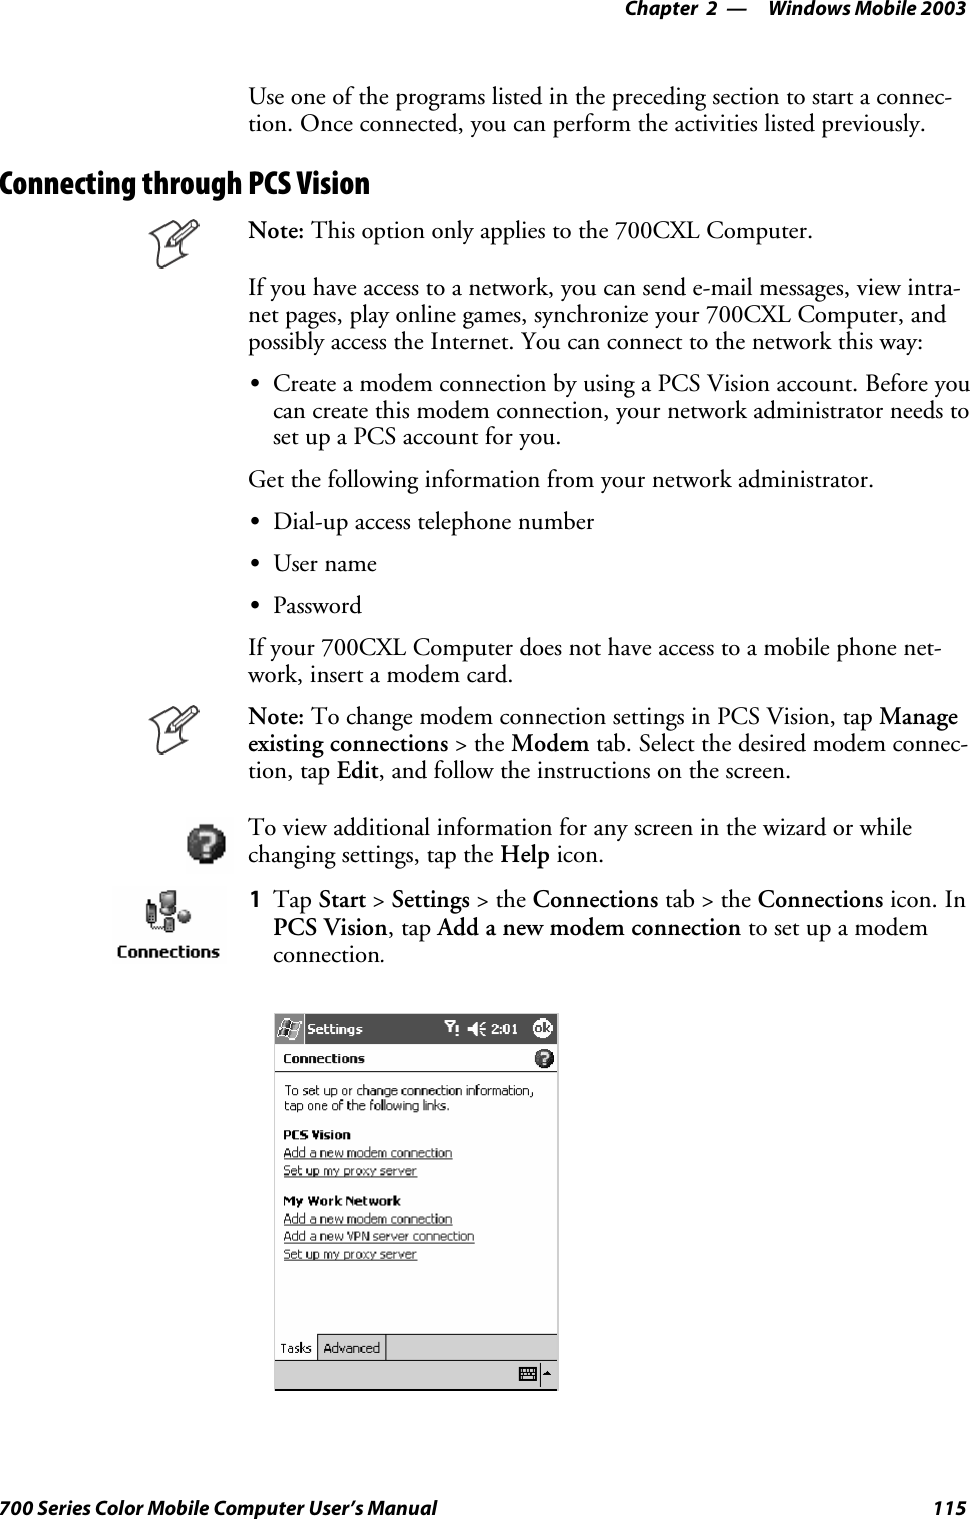 Windows Mobile 2003—Chapter 2115700 Series Color Mobile Computer User’s ManualUse one of the programs listed in the preceding section to start a connec-tion. Once connected, you can perform the activities listed previously.Connecting through PCS VisionNote: This option only applies to the 700CXL Computer.If you have access to a network, you can send e-mail messages, view intra-net pages, play online games, synchronize your 700CXL Computer, andpossibly access the Internet. You can connect to the network this way:SCreate a modem connection by using a PCS Vision account. Before youcan create this modem connection, your network administrator needs tosetupaPCSaccountforyou.Get the following information from your network administrator.SDial-up access telephone numberSUser nameSPasswordIf your 700CXL Computer does not have access to a mobile phone net-work, insert a modem card.Note: To change modem connection settings in PCS Vision, tap Manageexisting connections &gt;theModem tab. Select the desired modem connec-tion, tap Edit, and follow the instructions on the screen.To view additional information for any screen in the wizard or whilechanging settings, tap the Help icon.1Tap Start &gt;Settings &gt;theConnections tab&gt;theConnections icon. InPCS Vision,tapAdd a new modem connection to set up a modemconnection.